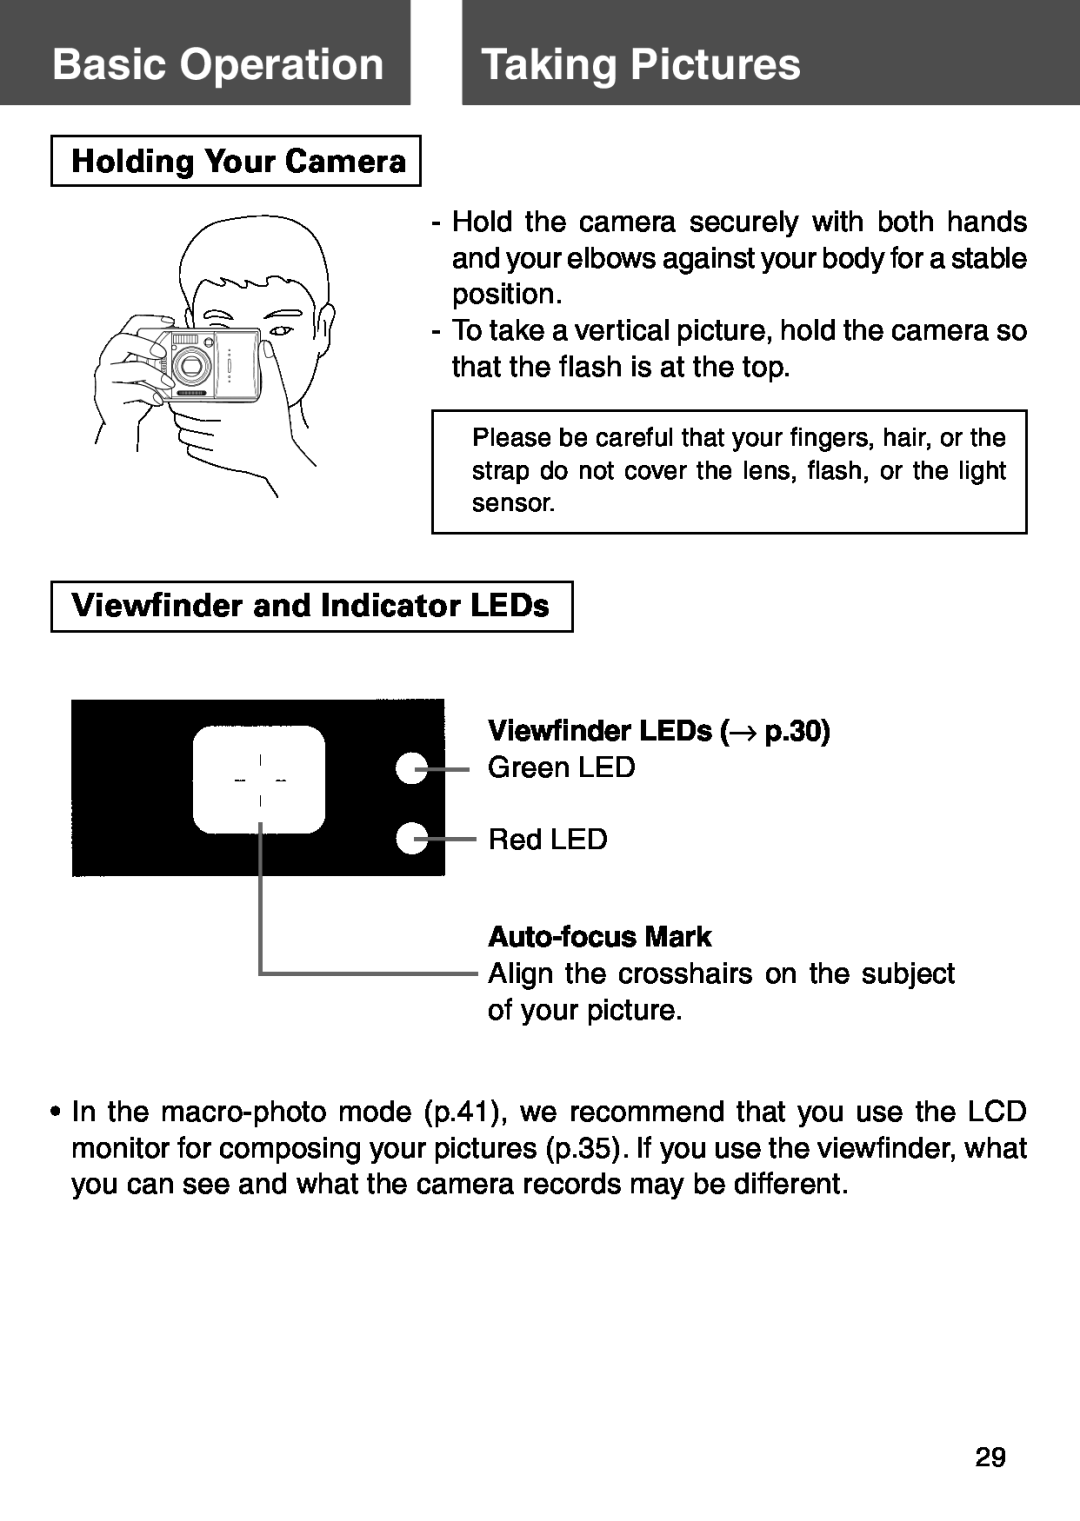 Konica Minolta KD-500Z user manual Basic Operation, Taking Pictures, Holding Your Camera, Viewfinder and Indicator LEDs 